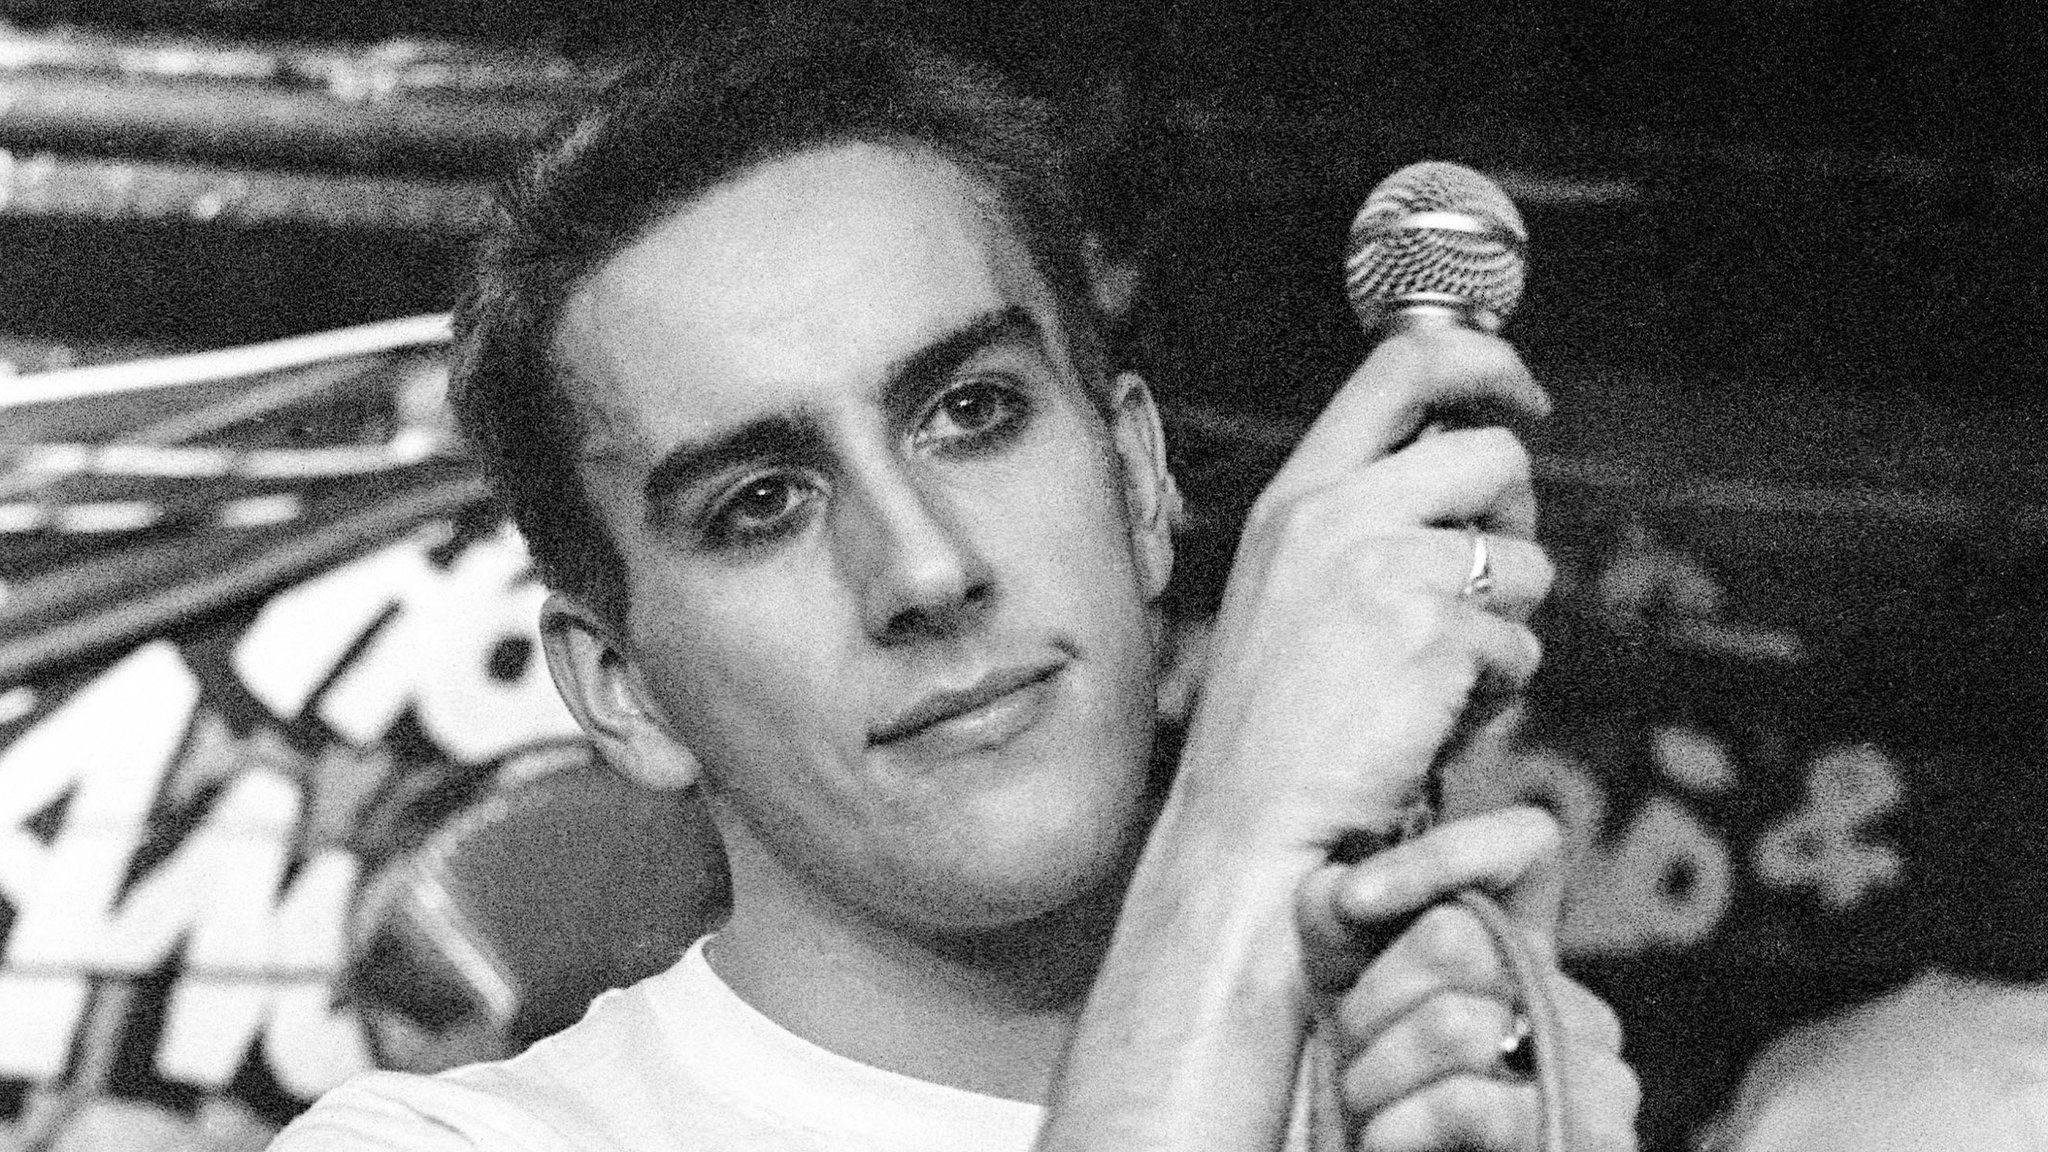 Terry Hall of The Specials performing at the Hope & Anchor pub in Islington in London in November 1980